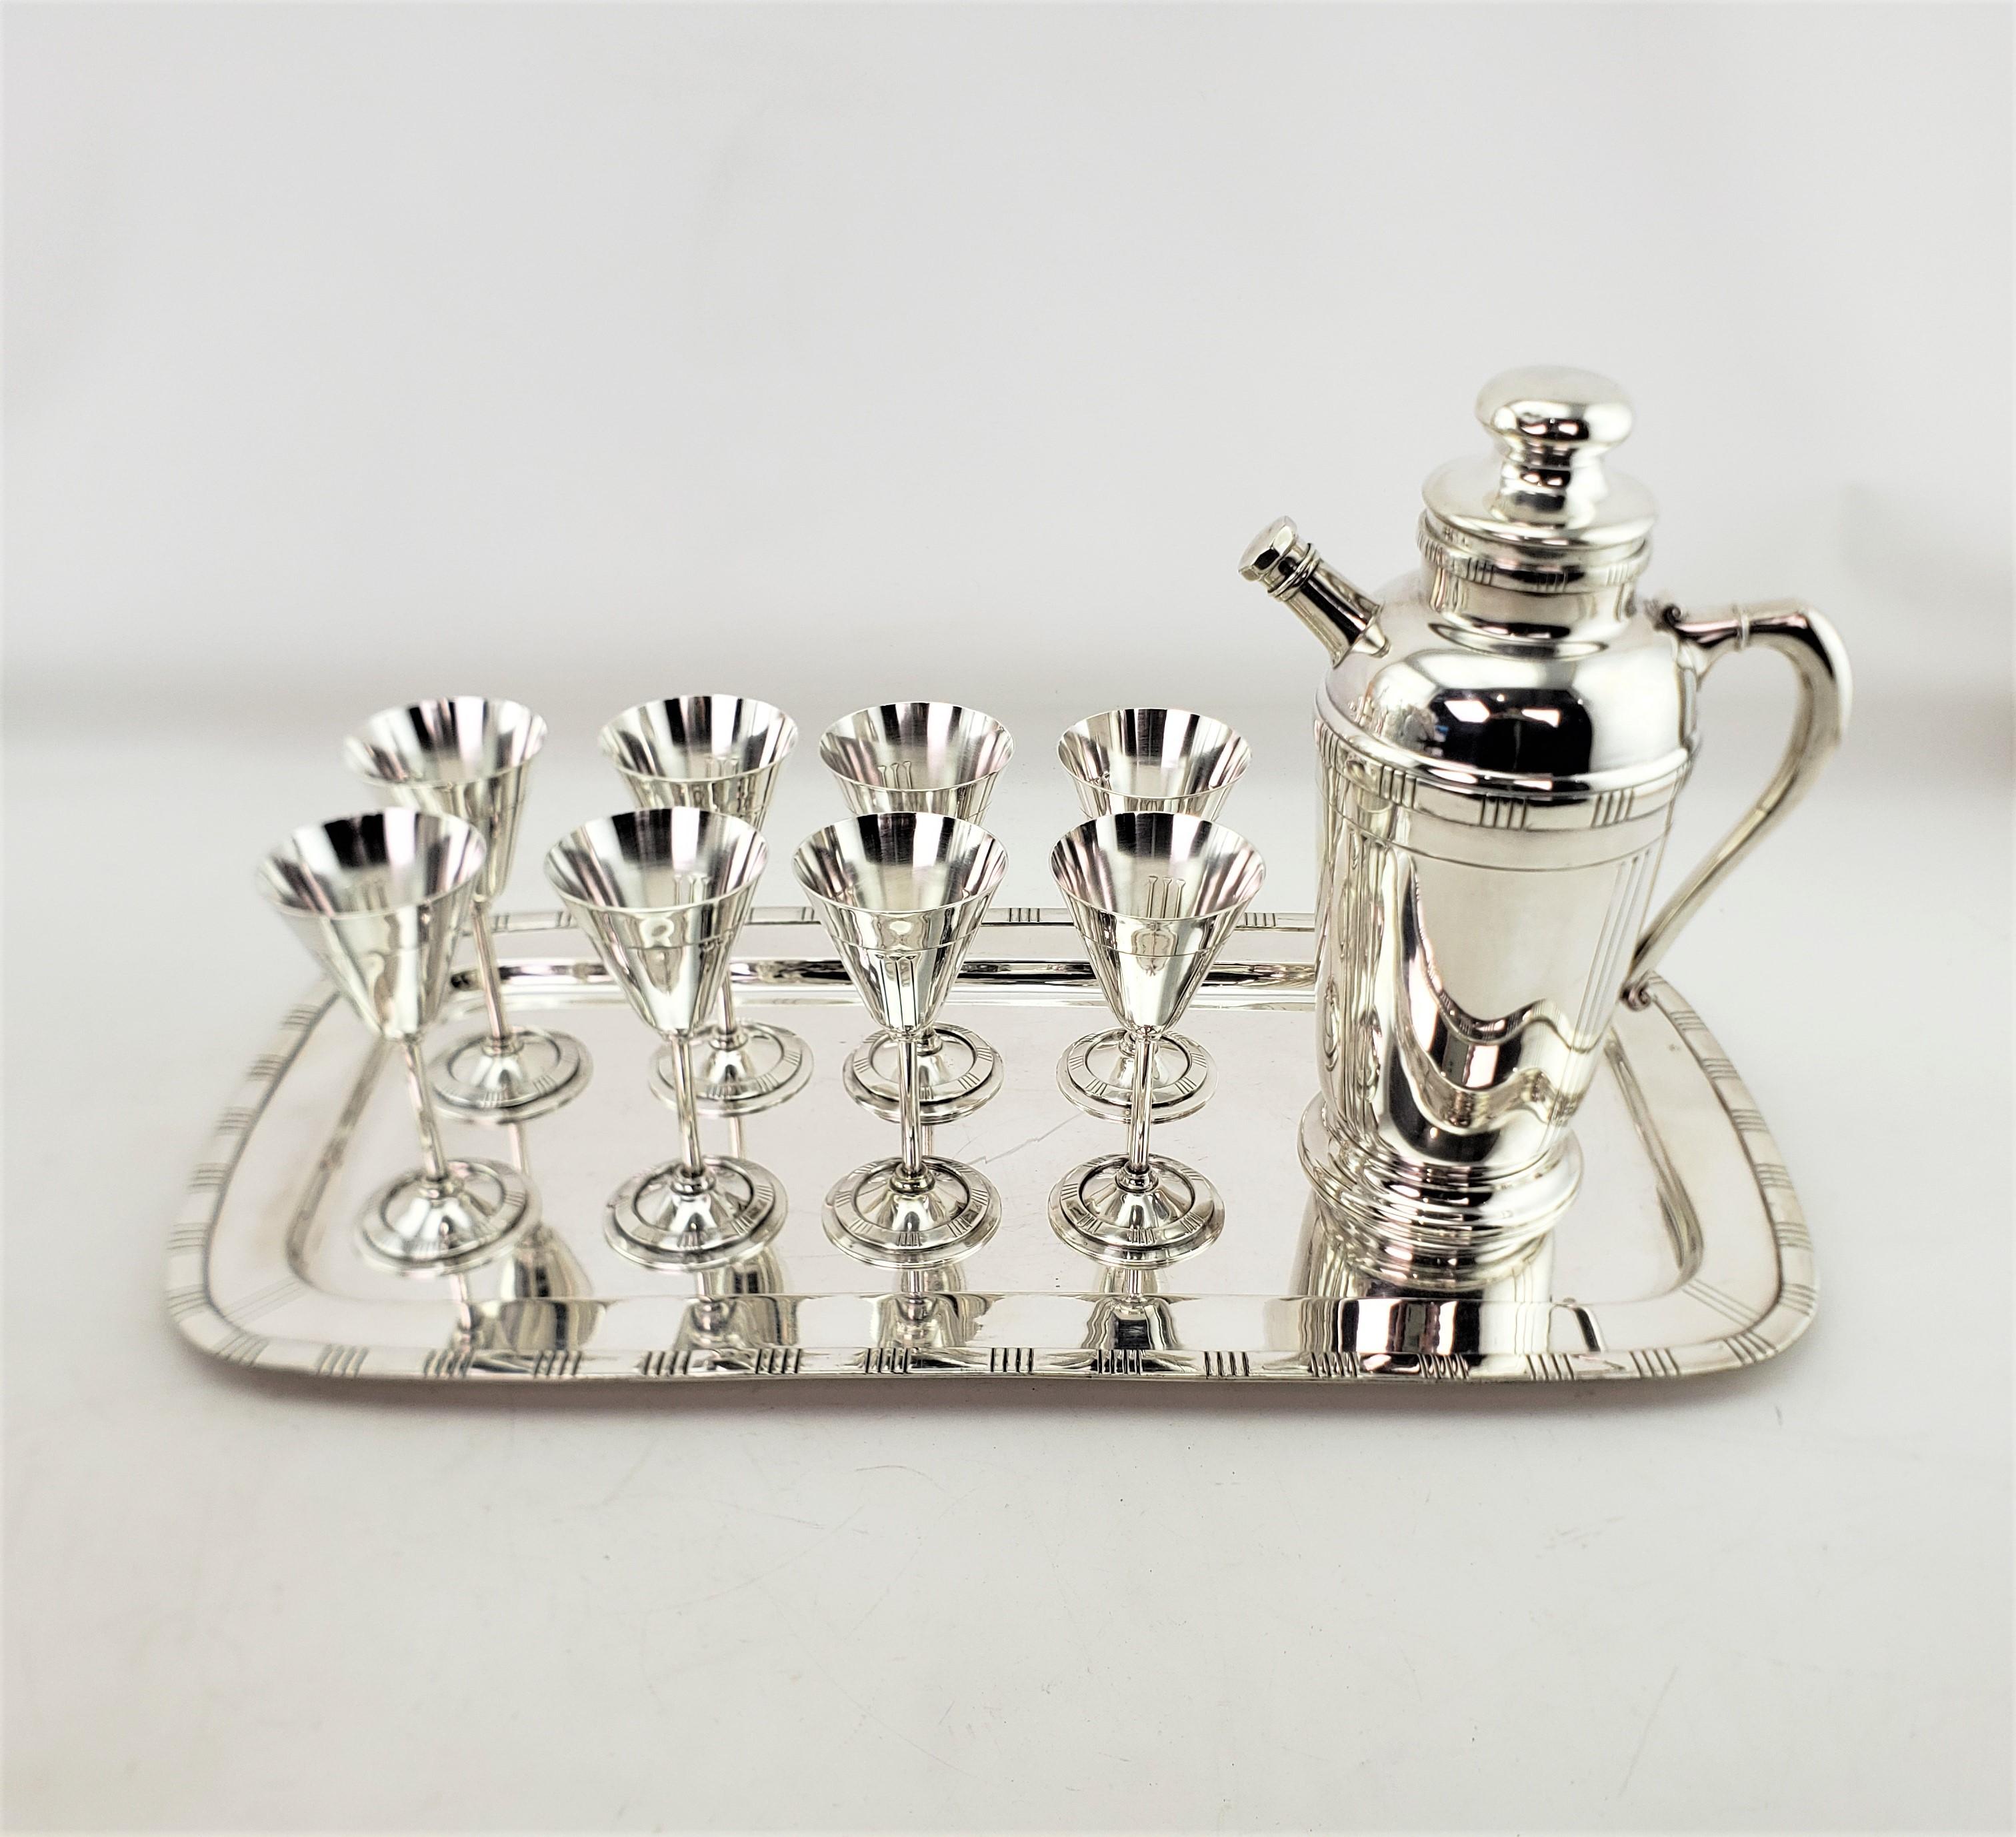 This vintage cocktail set was made by the Bernard Rice's & Sons of the United States and dates to approximately 1965 and done in their Patricia pattern. The set is composed of silver plate and consists of eight stemmed glasses, and shaker pitcher